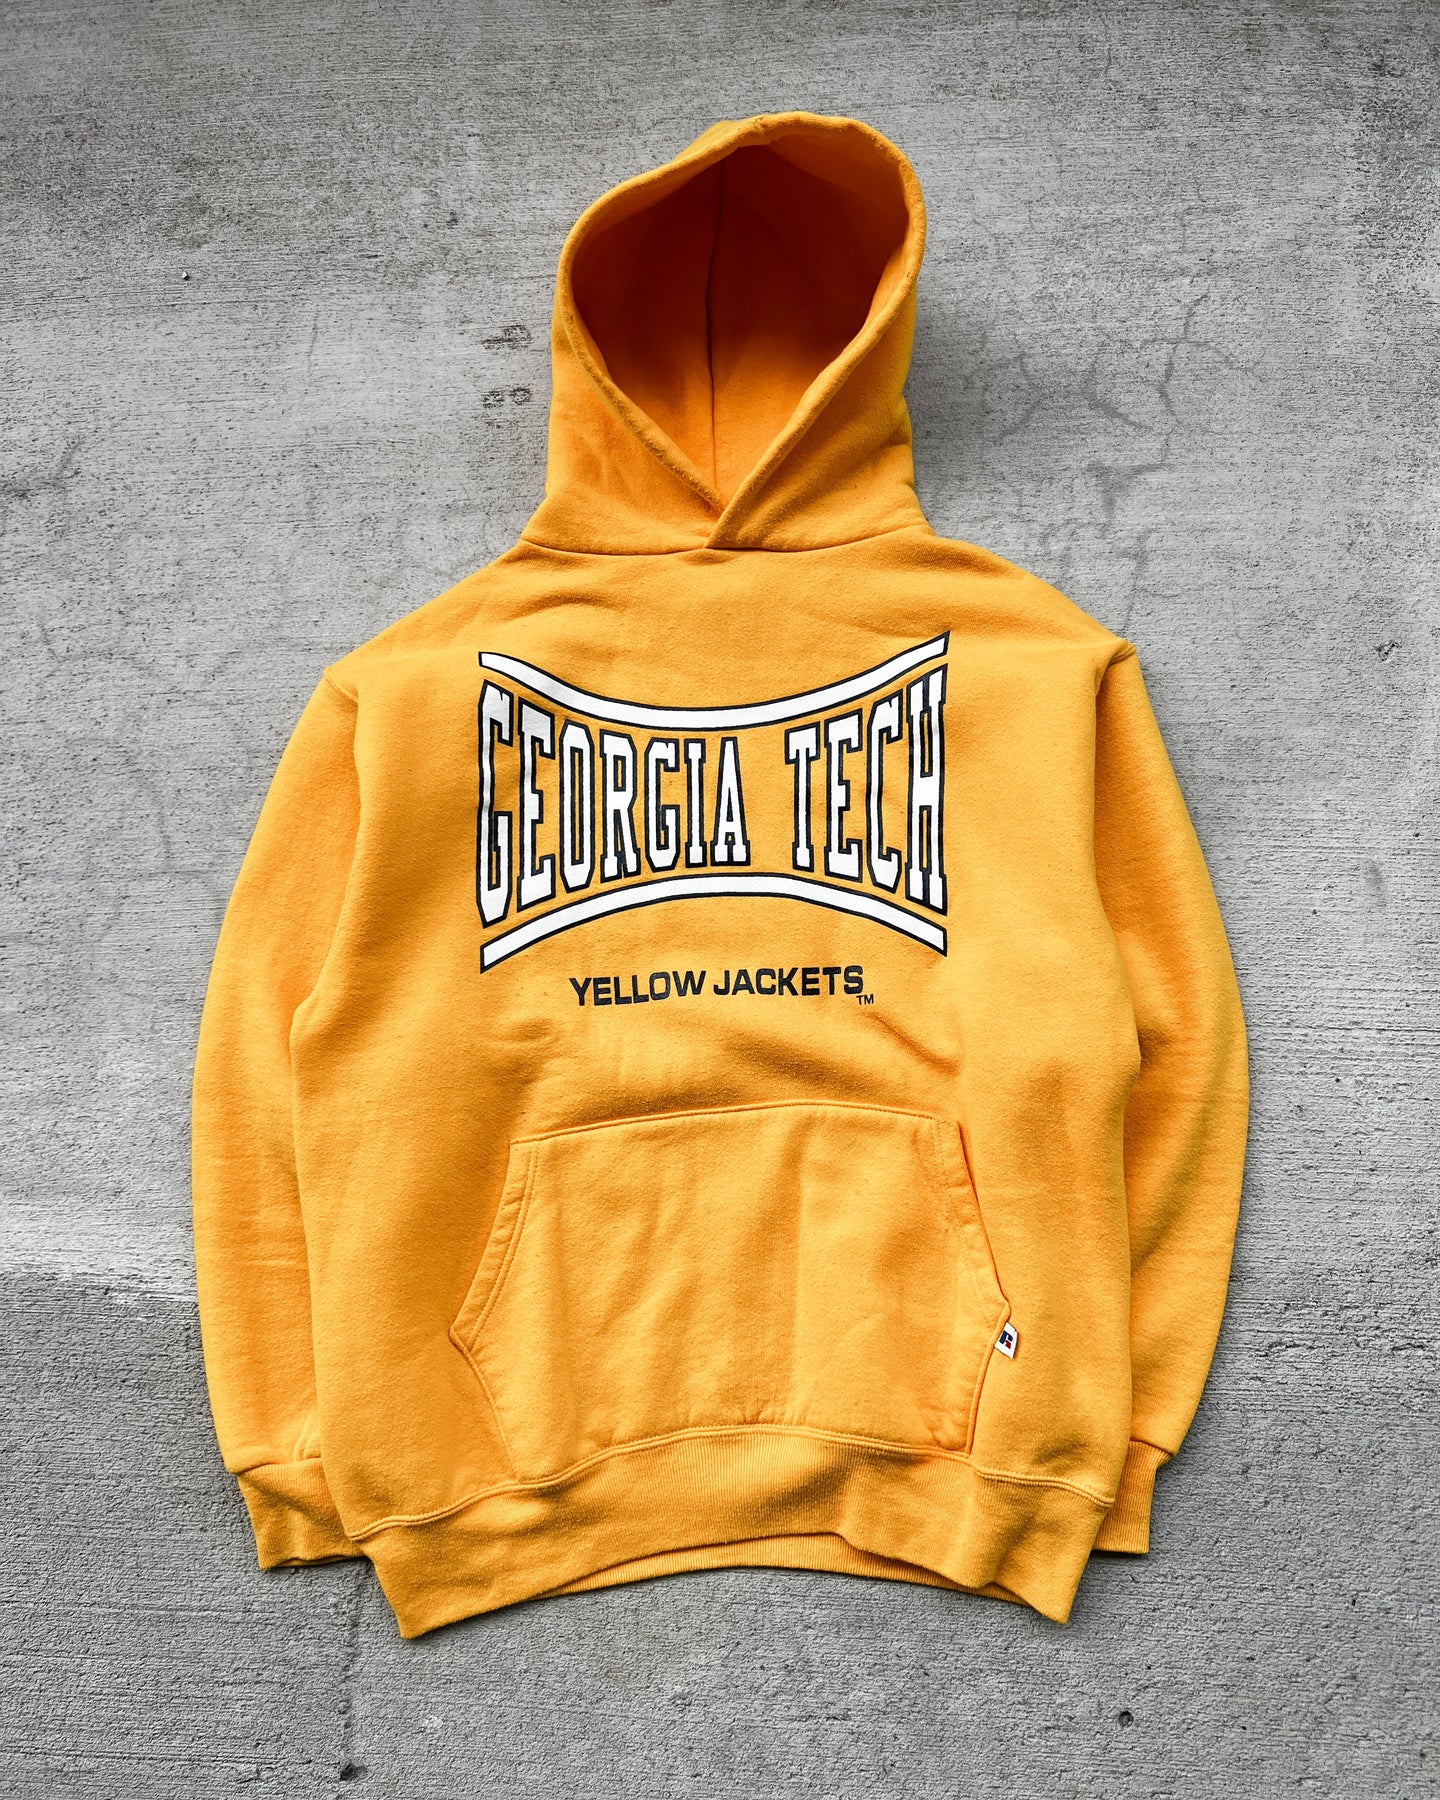 1990s Russell Georgia Tech Hoodie - Size Large